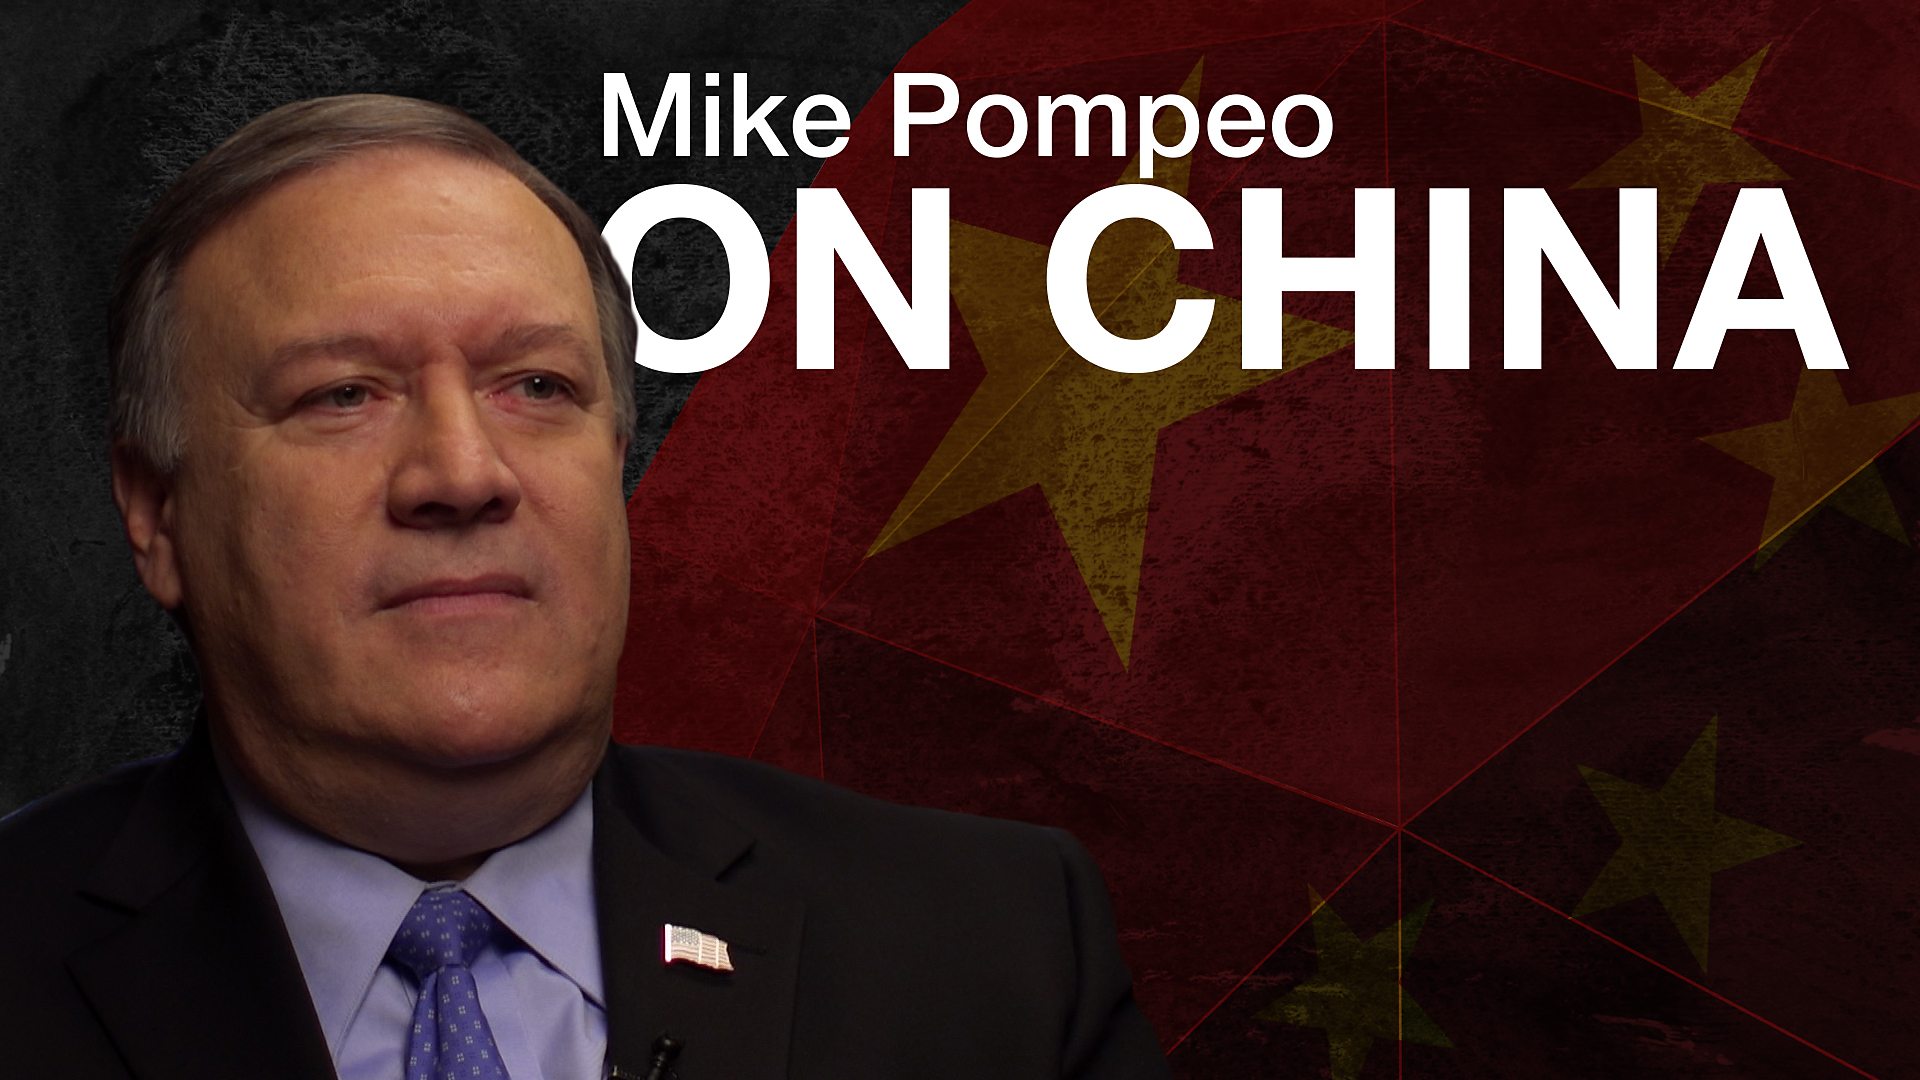 Mike Pompeo: 'Claims about Trump dangerous and false' - BBC News